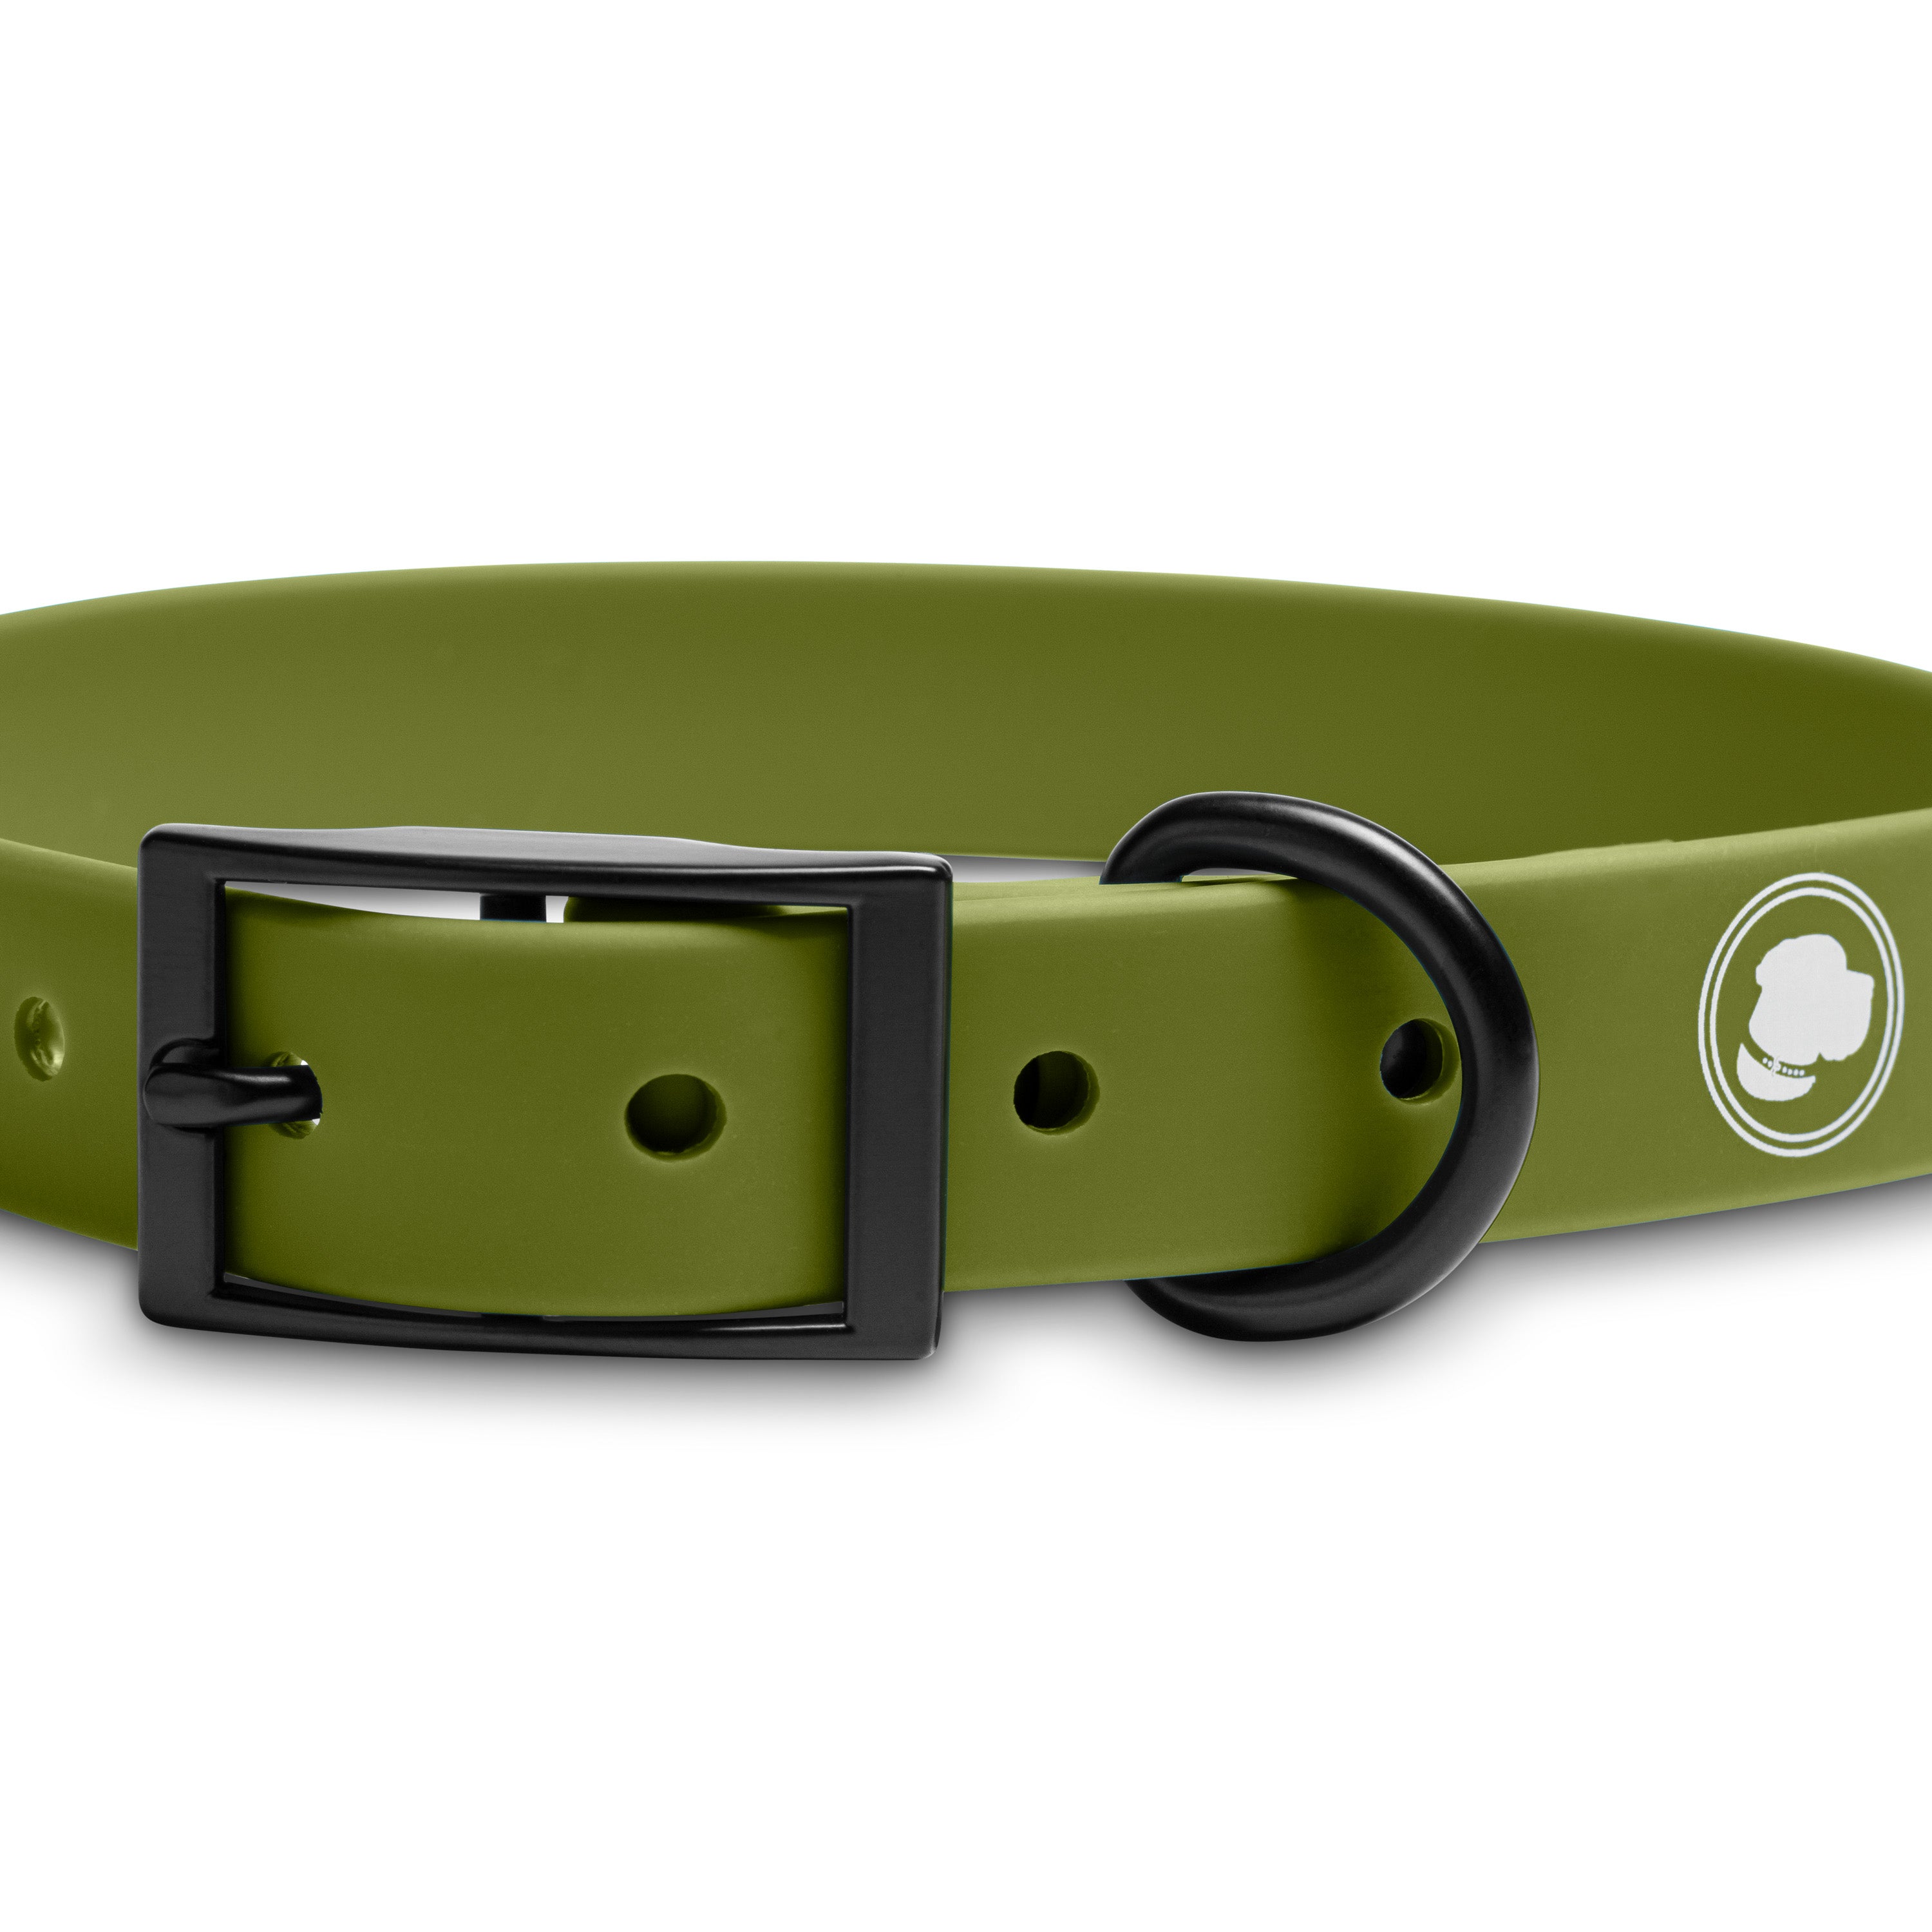 The Modern Dog Company - Olive Green Collar (Weather + Odor Resistant)